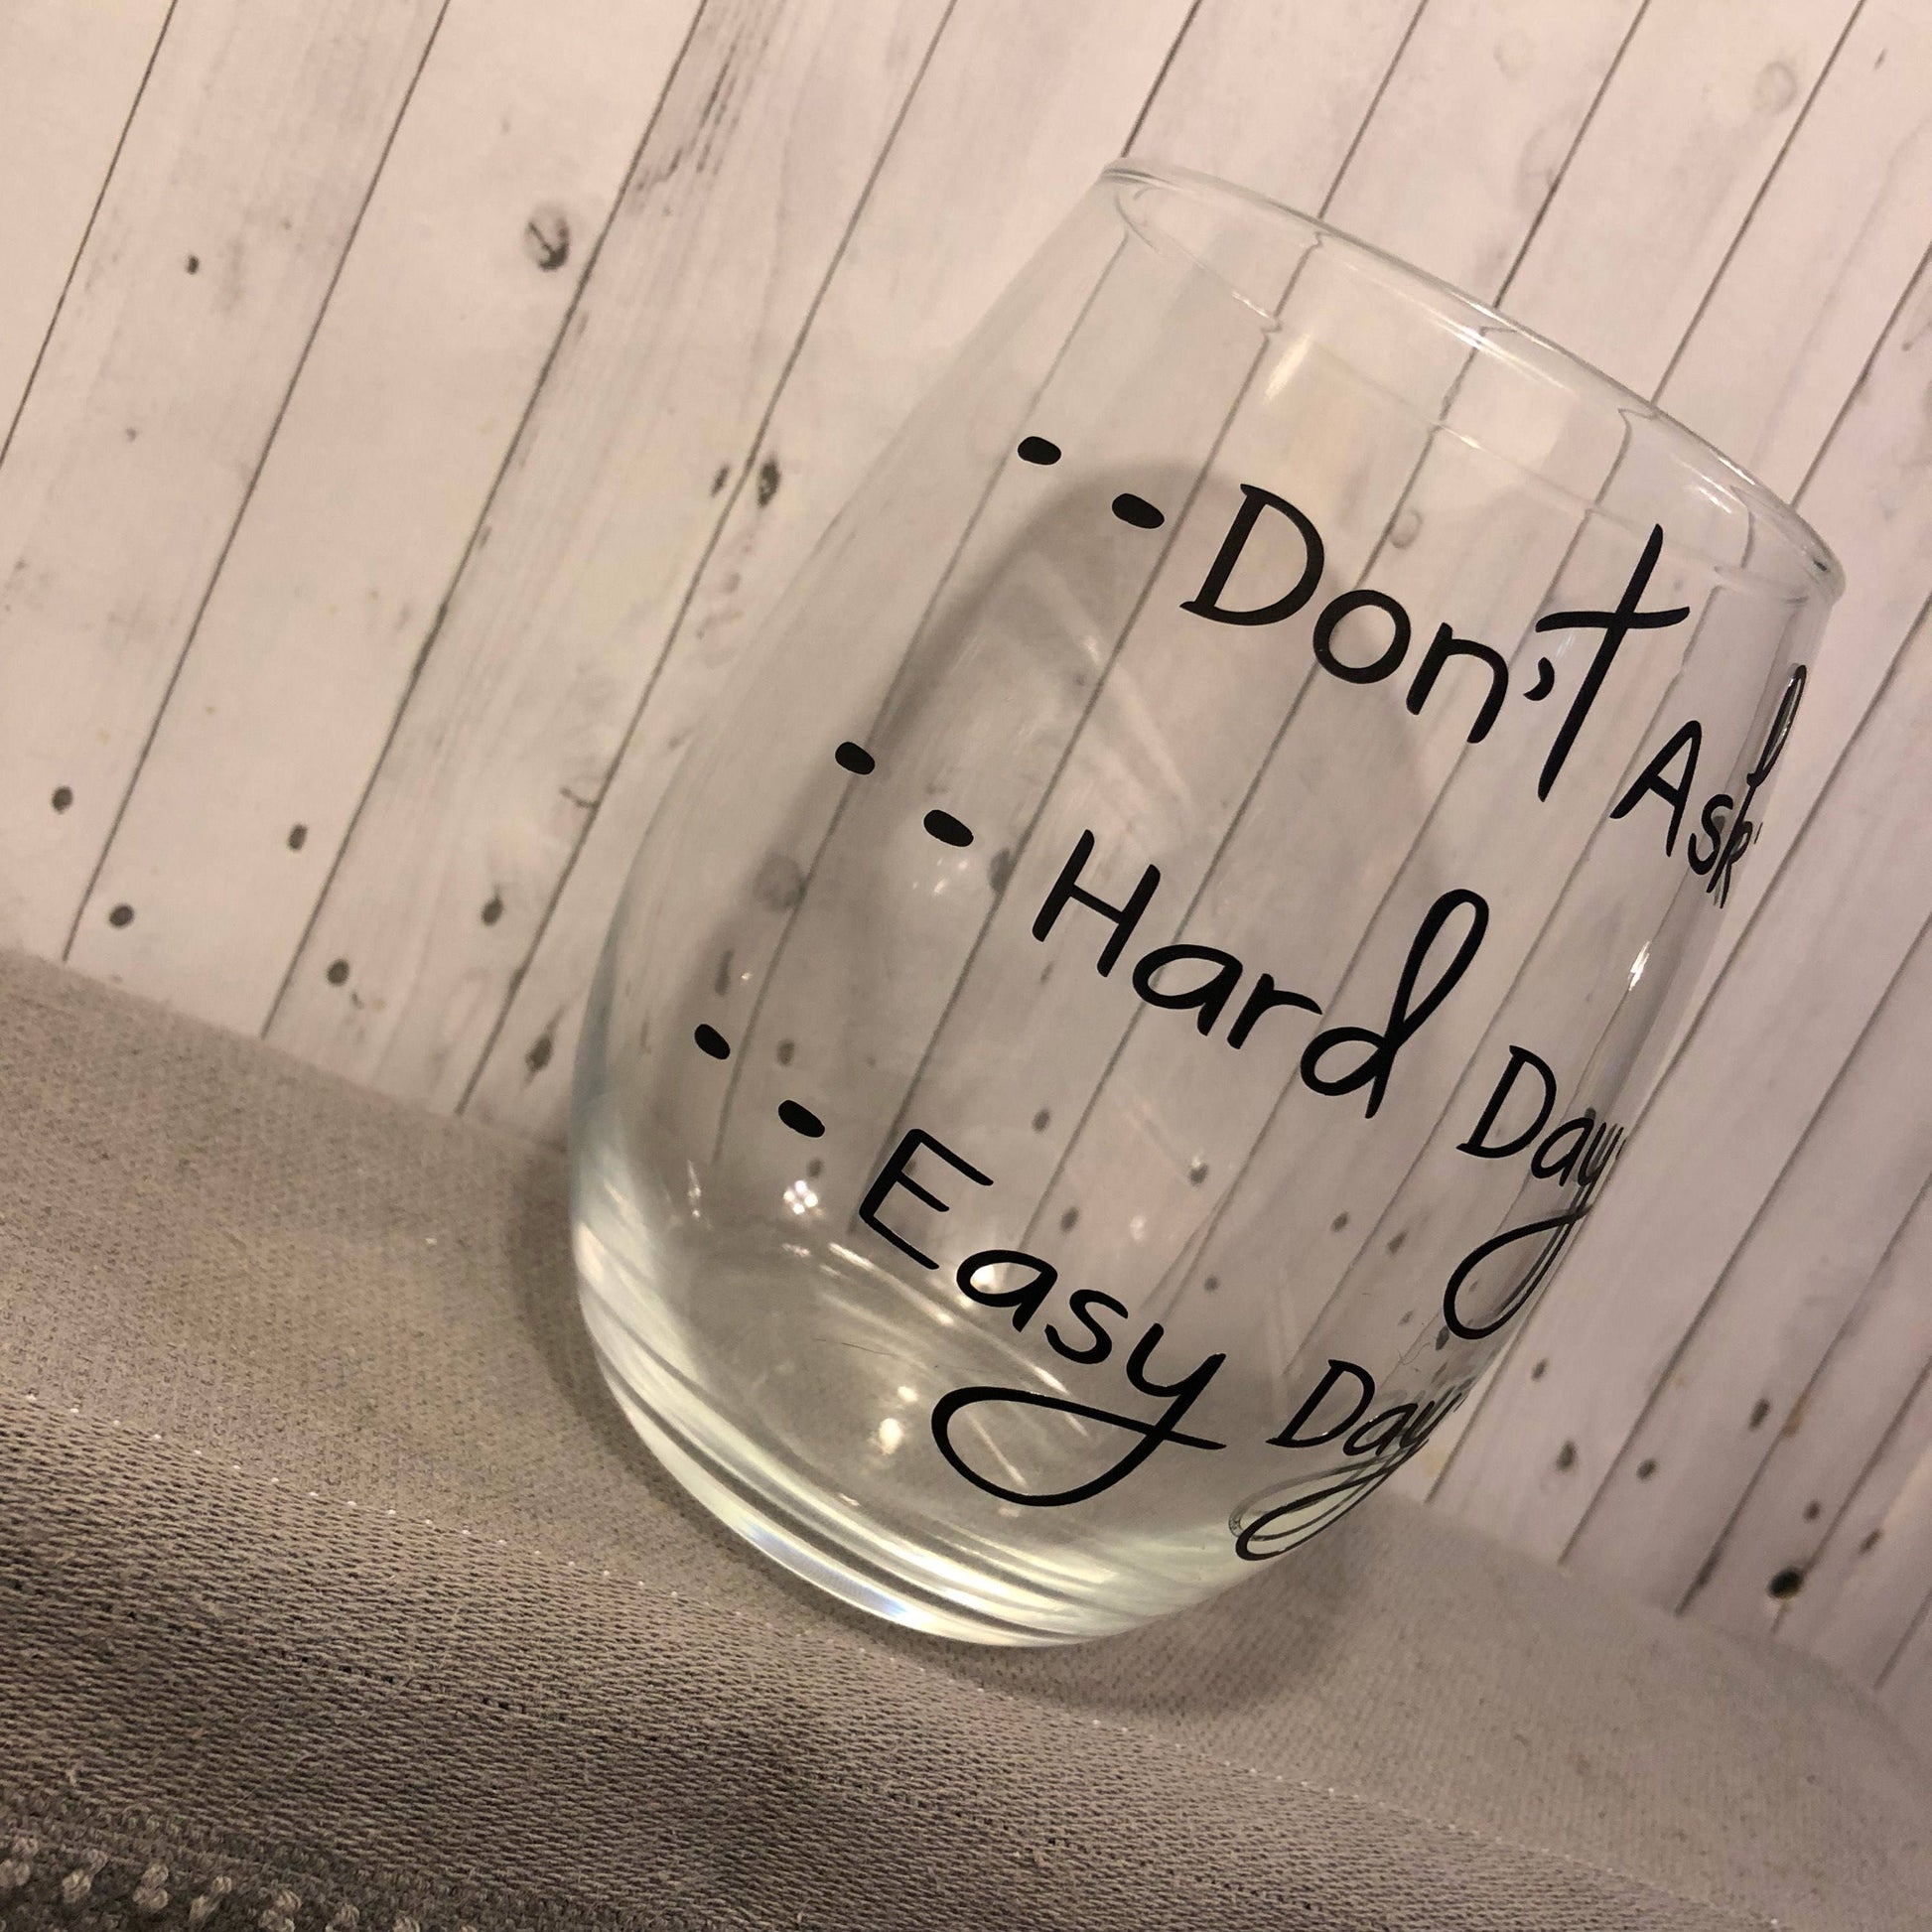 good day bad day don't ask, easy day hard day don't ask,funny christmas gift, birthday gifts for her, funny gifts, funny wine glasses